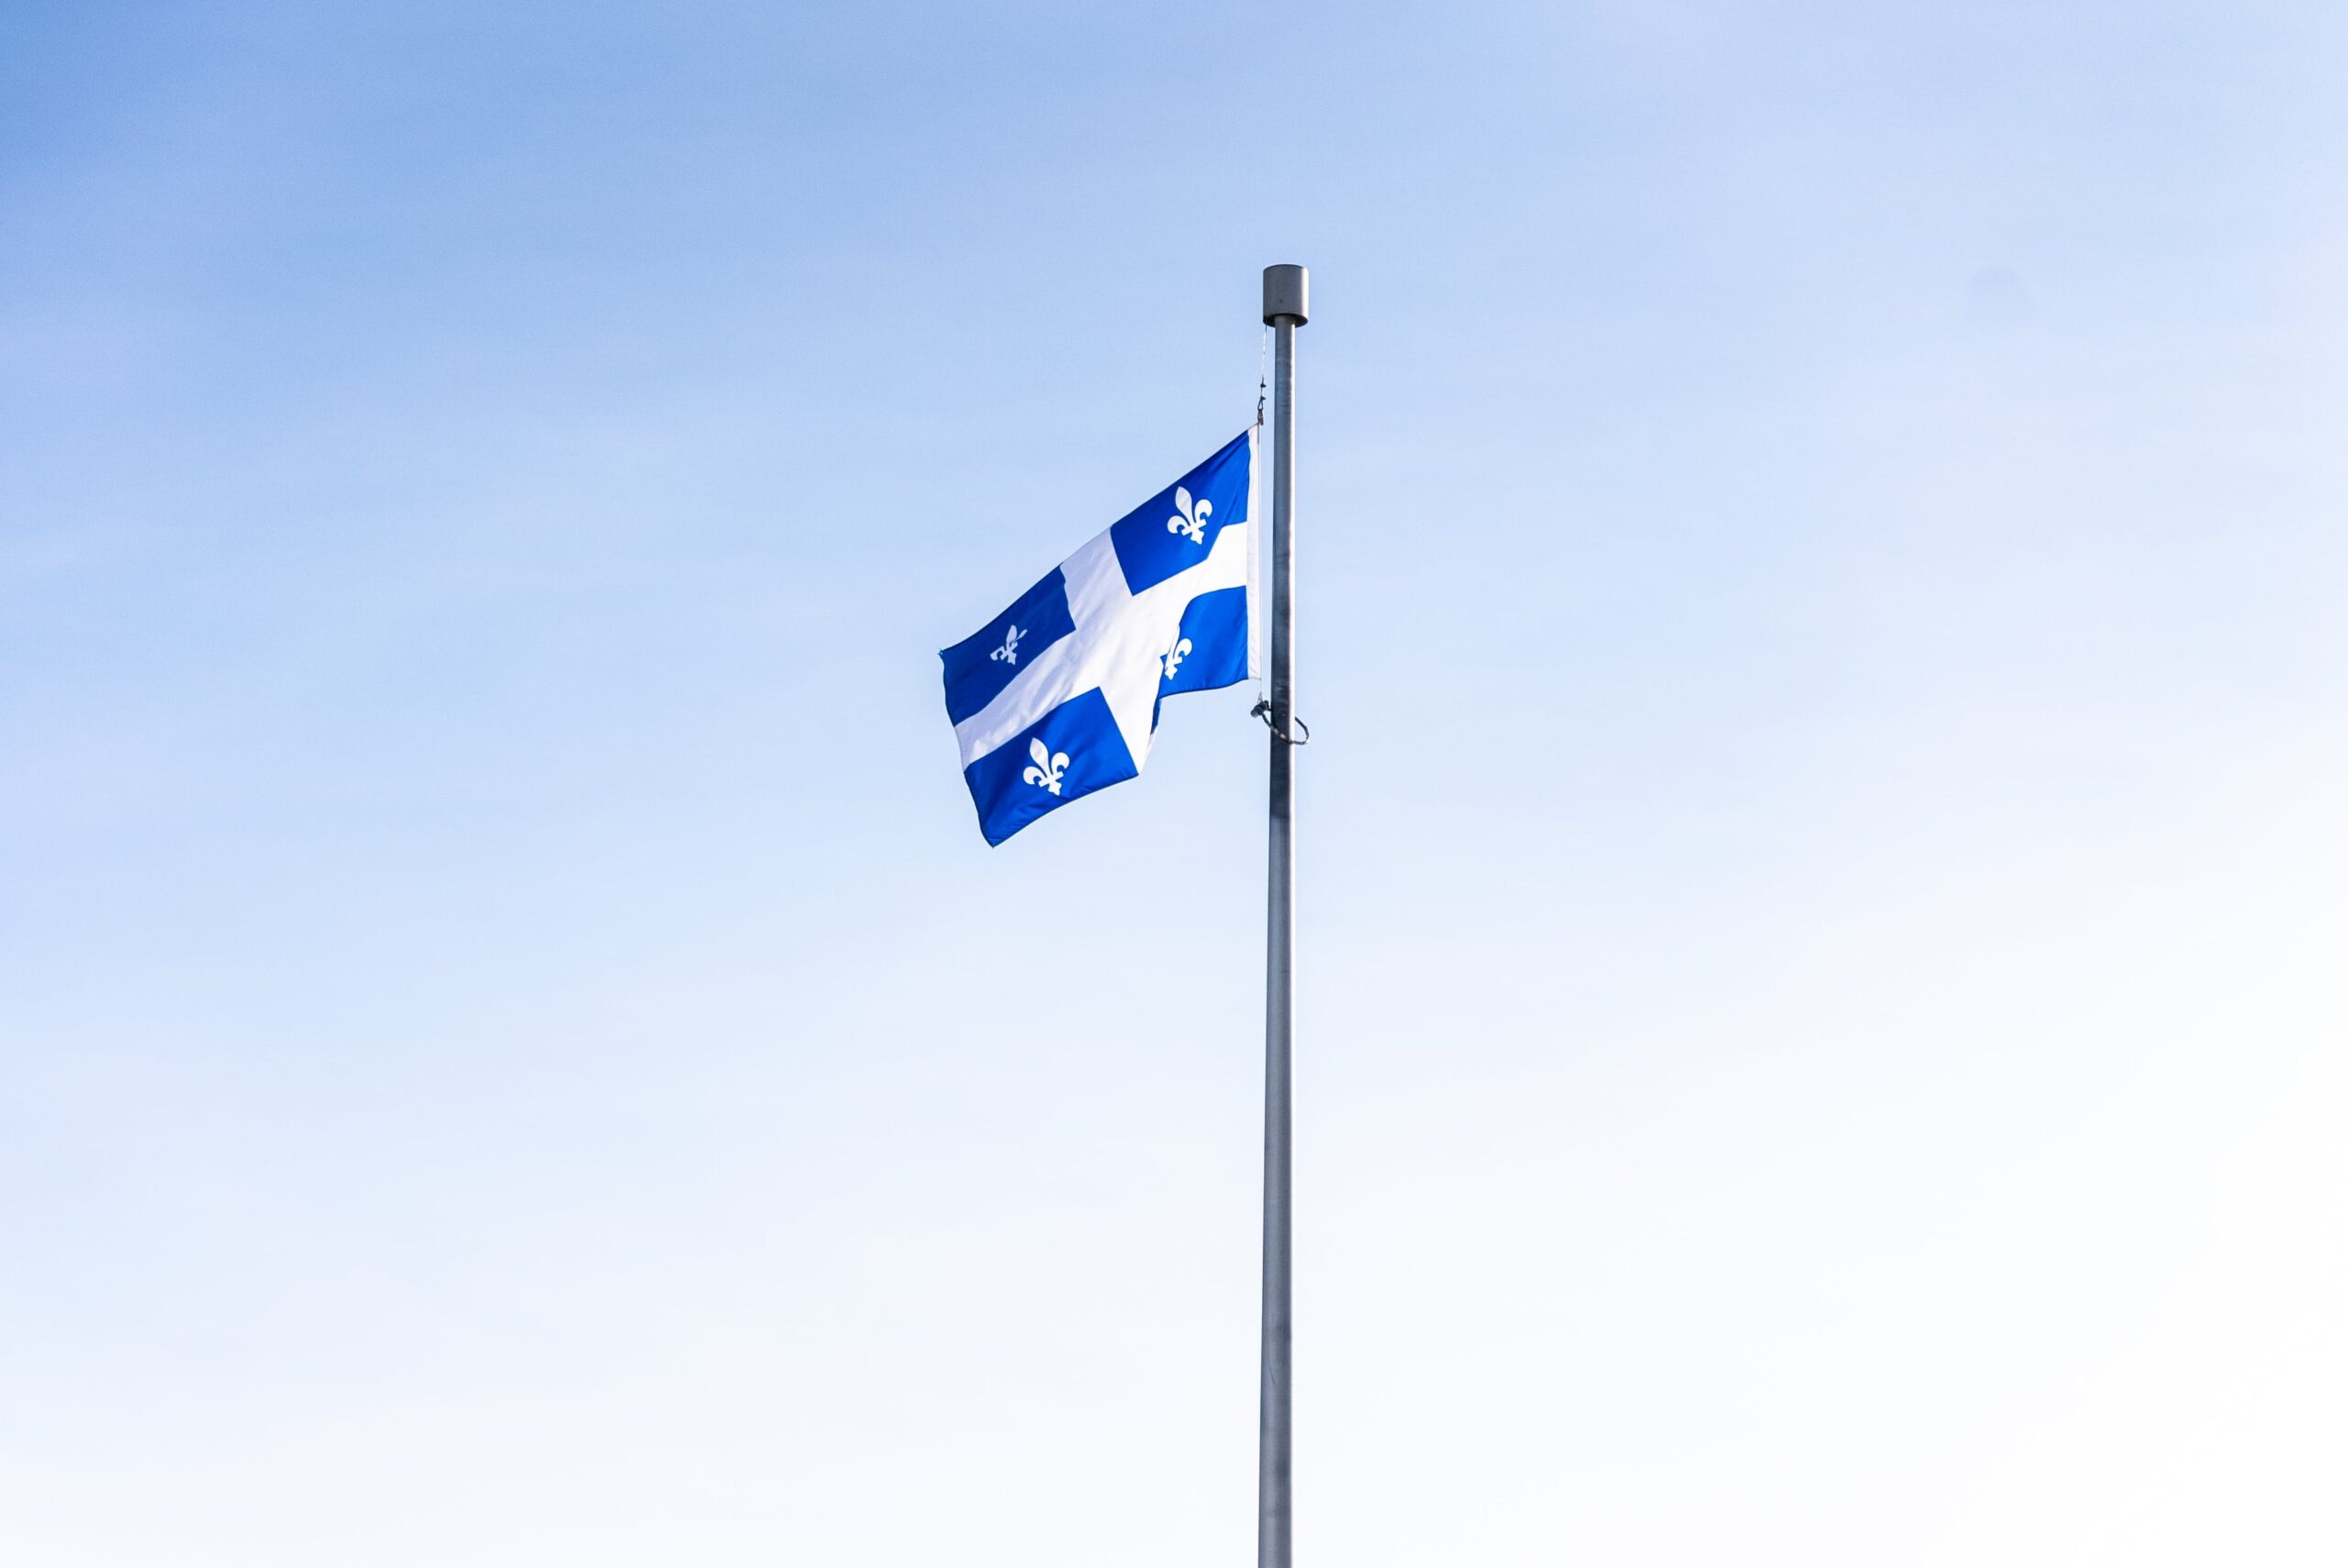 Quebec Flag representing immigration measures to promote Francophone communities outside of Quebec